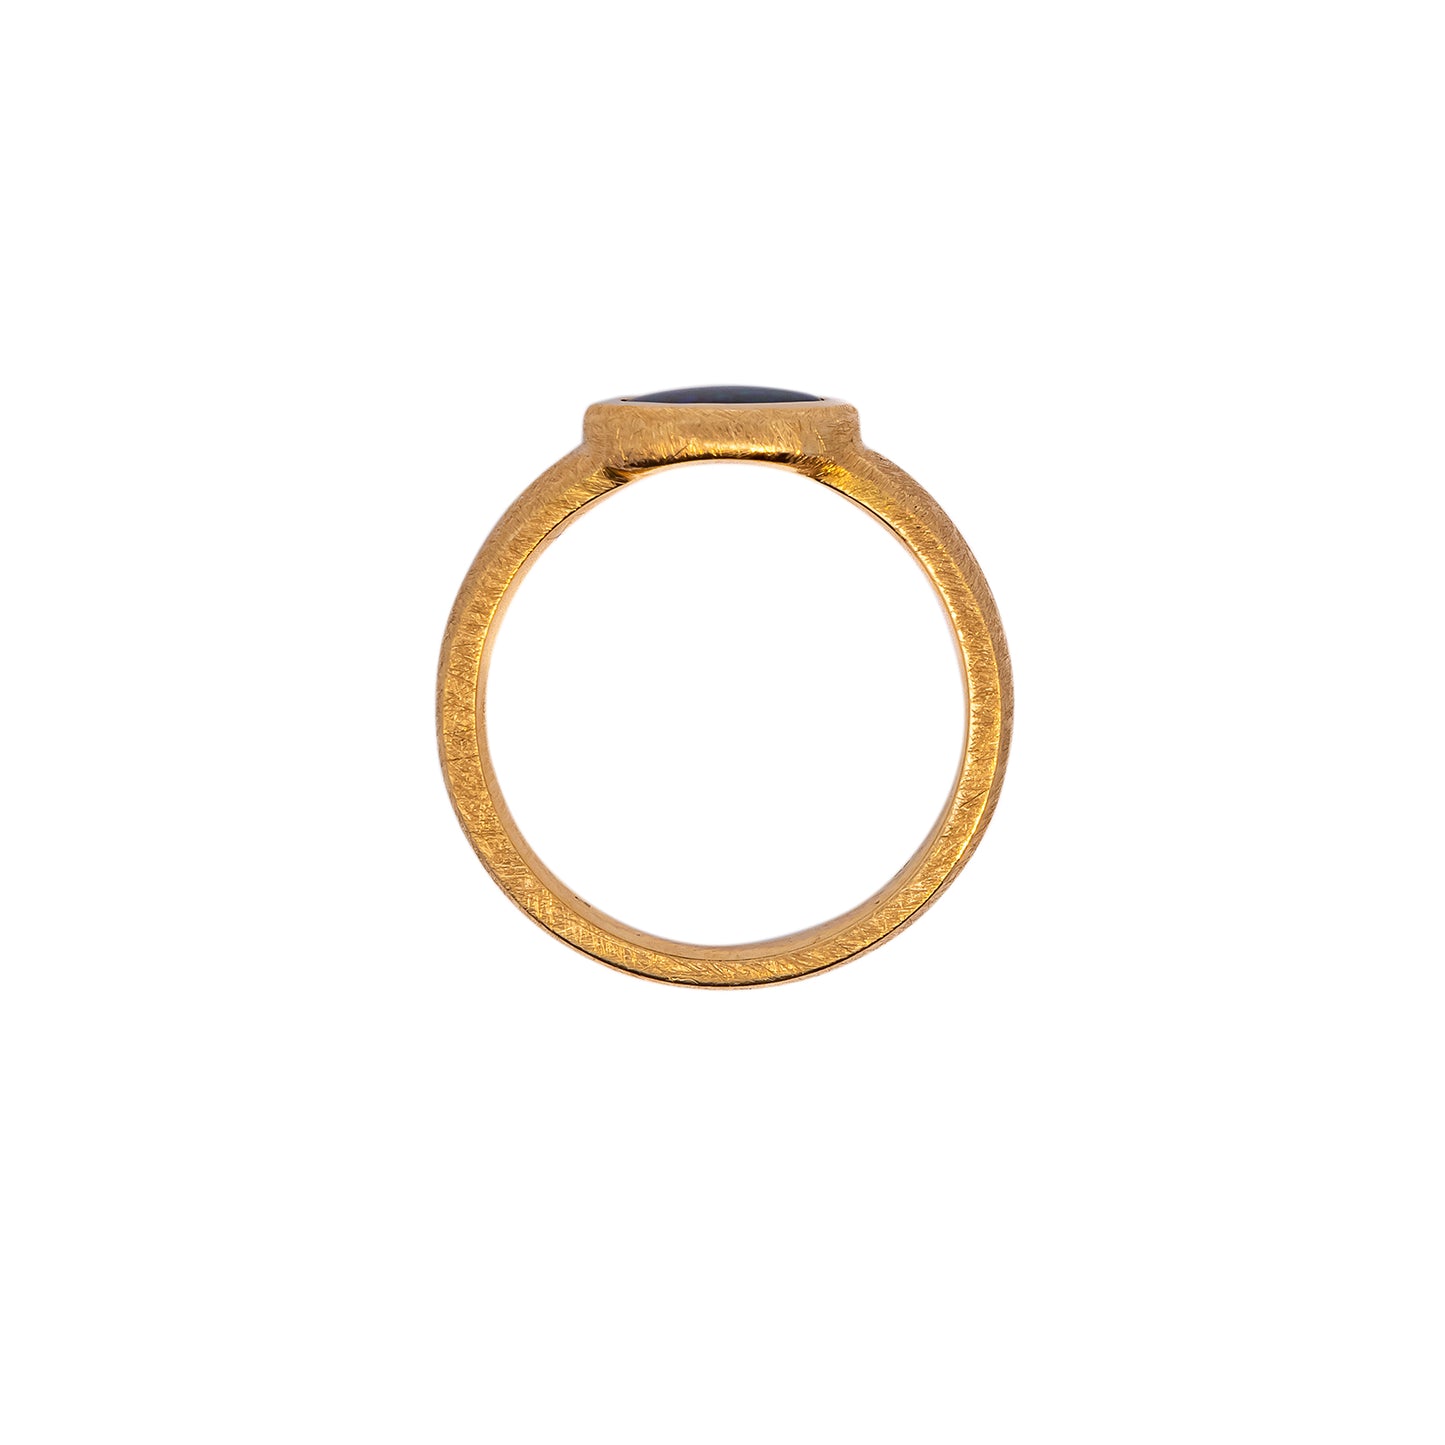 Gemstone Ring Opaldoublette Yellow Gold 18K Women's Jewelry Band Ring Gold Ring 